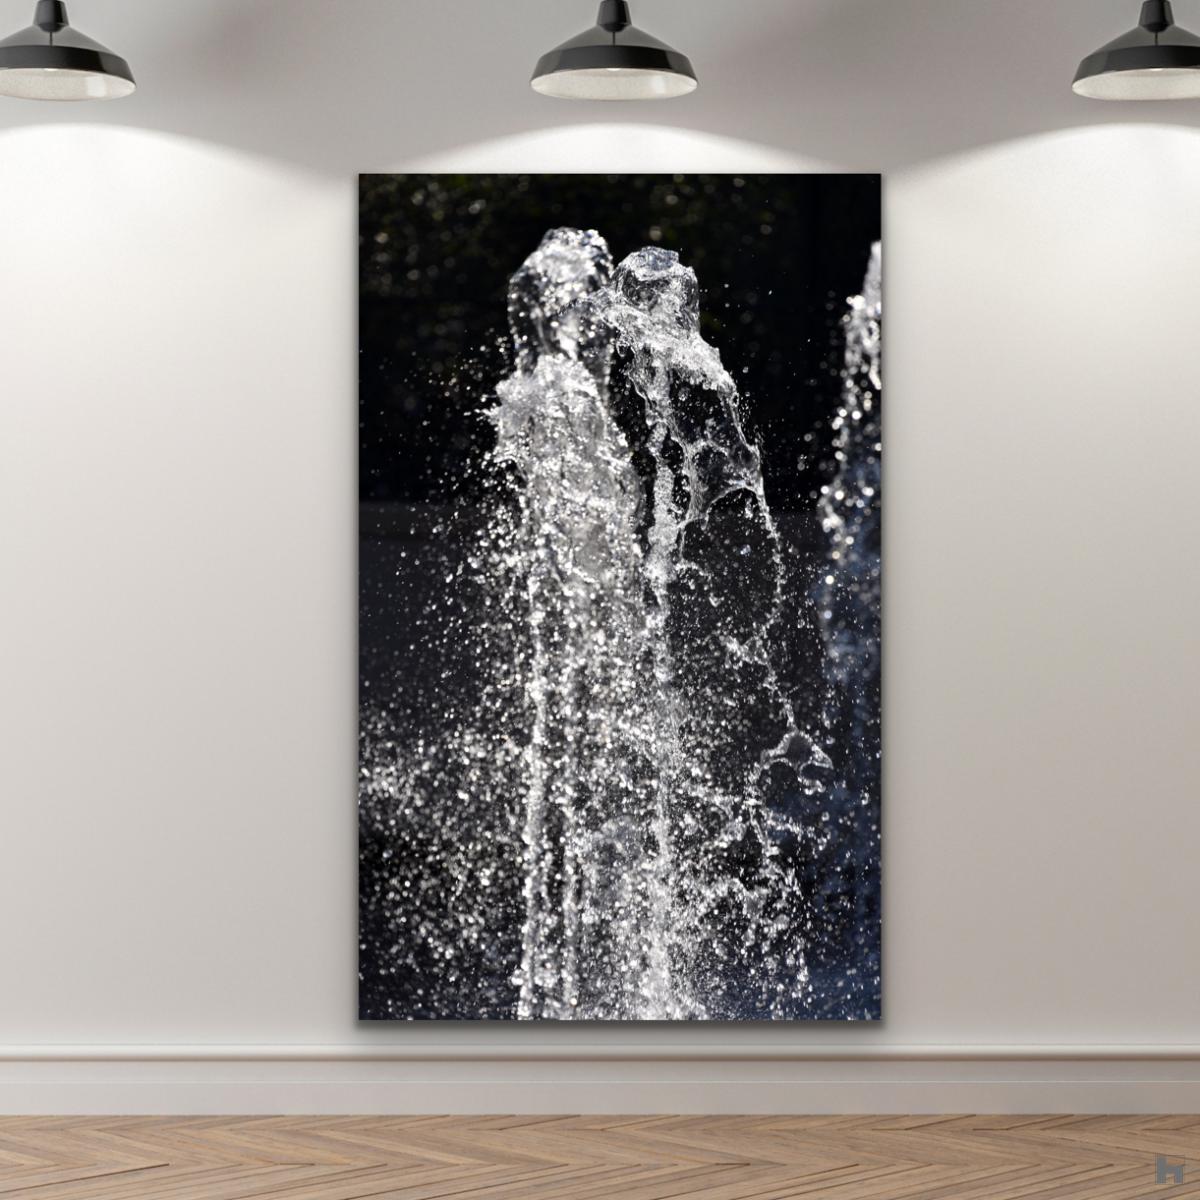 "The Kiss", magic of water